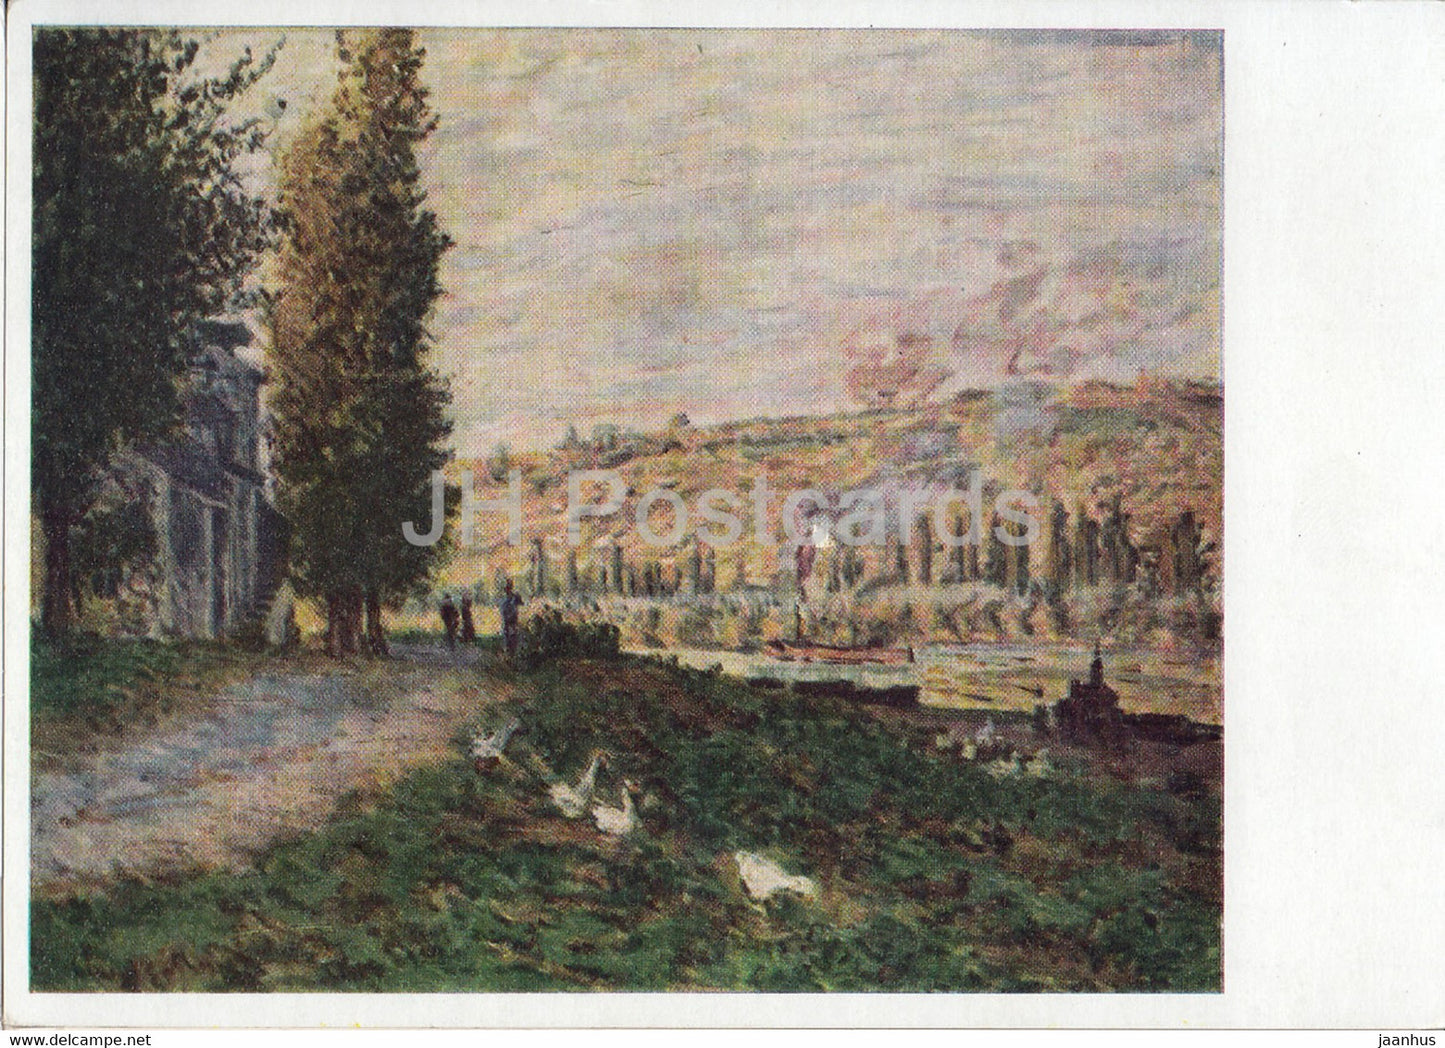 painting by Claude Monet - Selneboschung bei Lavacourt - Seine - French art - Germany DDR - unused - JH Postcards